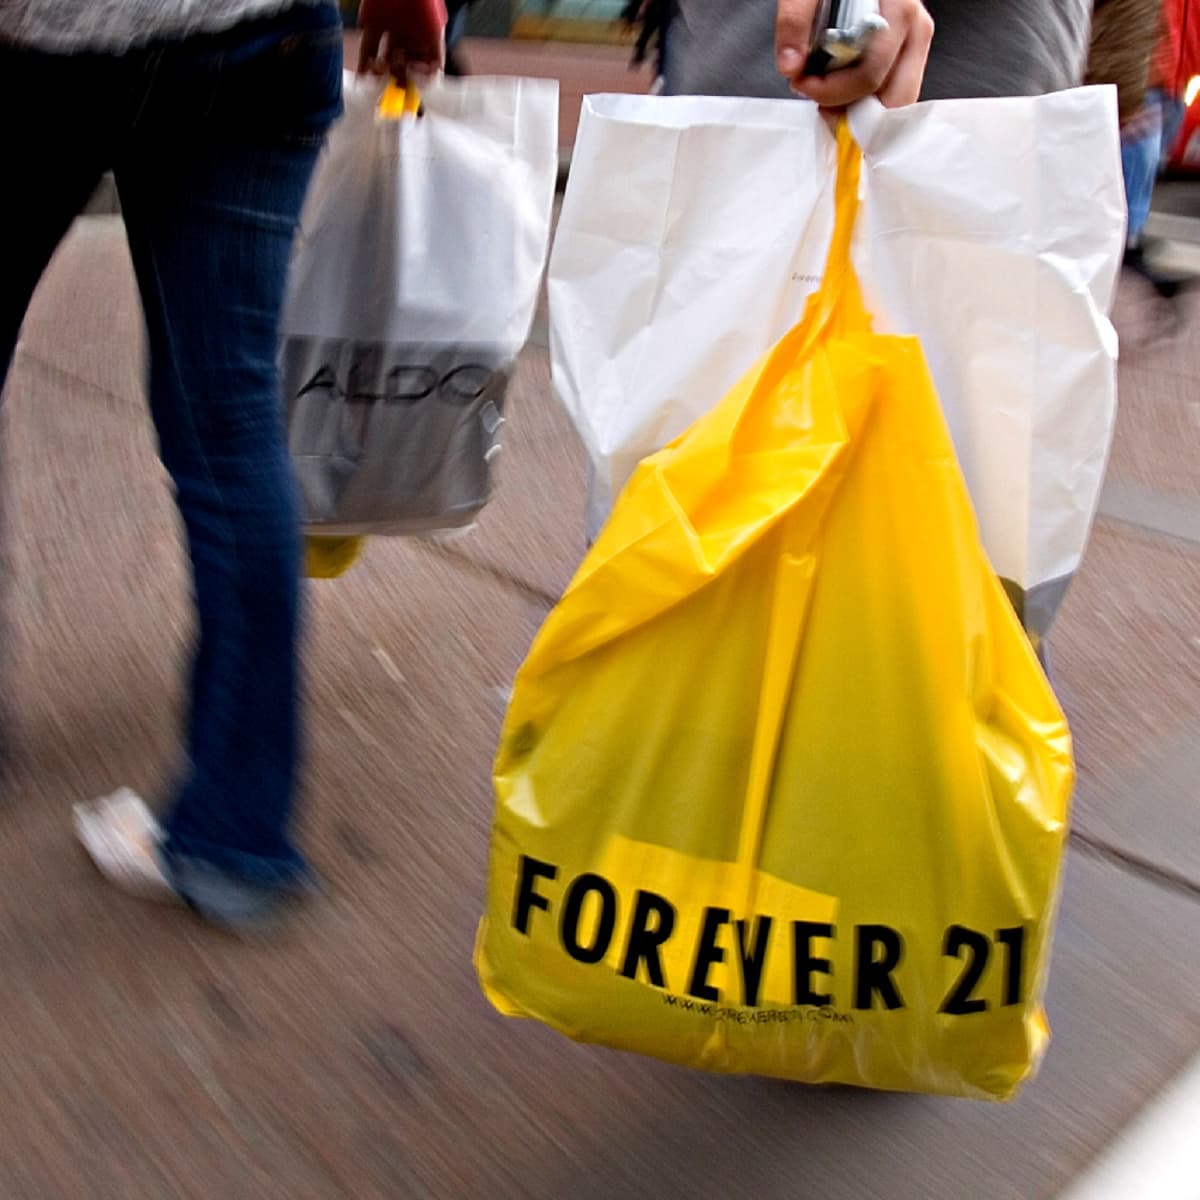 Forever 21 bankruptcy and sale: What does that actually mean? - Vox